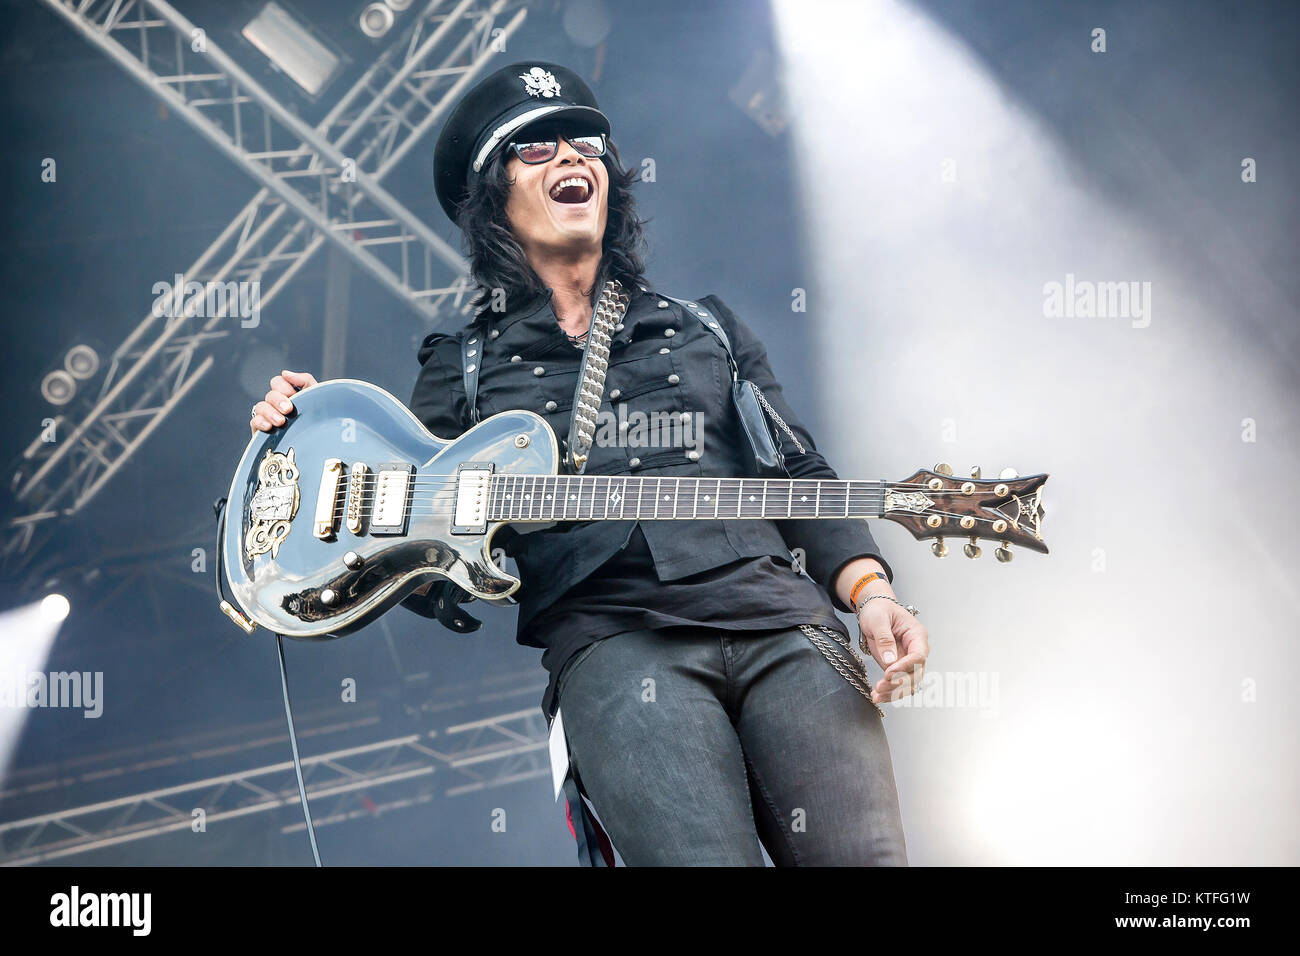 The American hard rock band L.A. Guns performs a live concert at the Sweden Rock Festival 2016. Here guitarist Michael Grant is seen live on stage. Sweden, 09/06 2016. Stock Photo